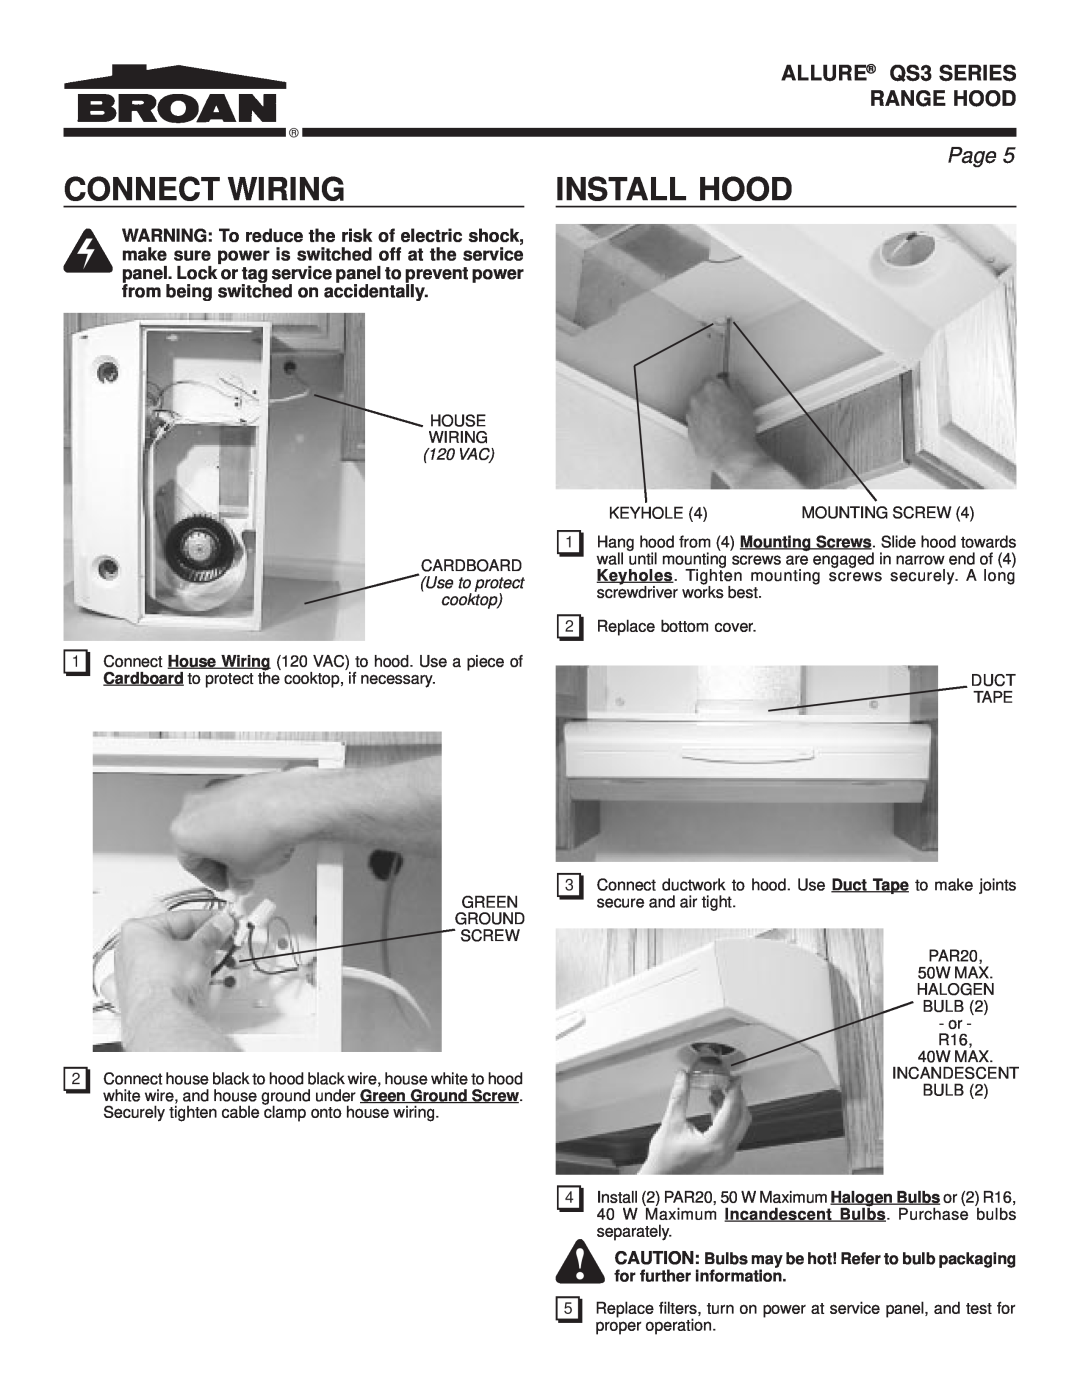 Broan warranty Connect Wiring, Install Hood, ALLURE QS3 SERIES, Range Hood, Page 